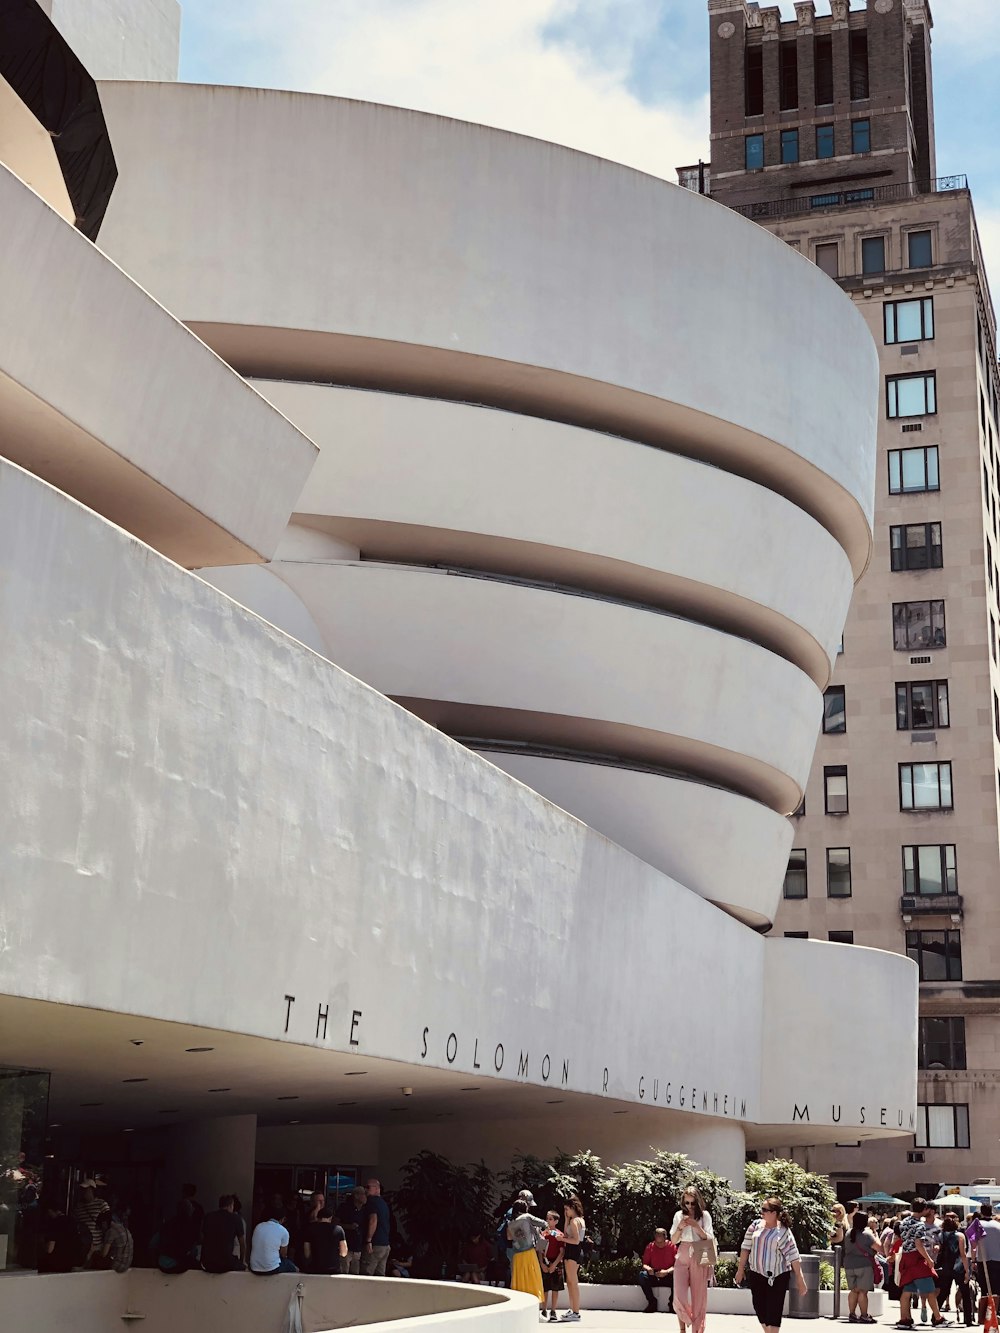 a large white building with a curved roof with Solomon R. Guggenheim Museum in the background